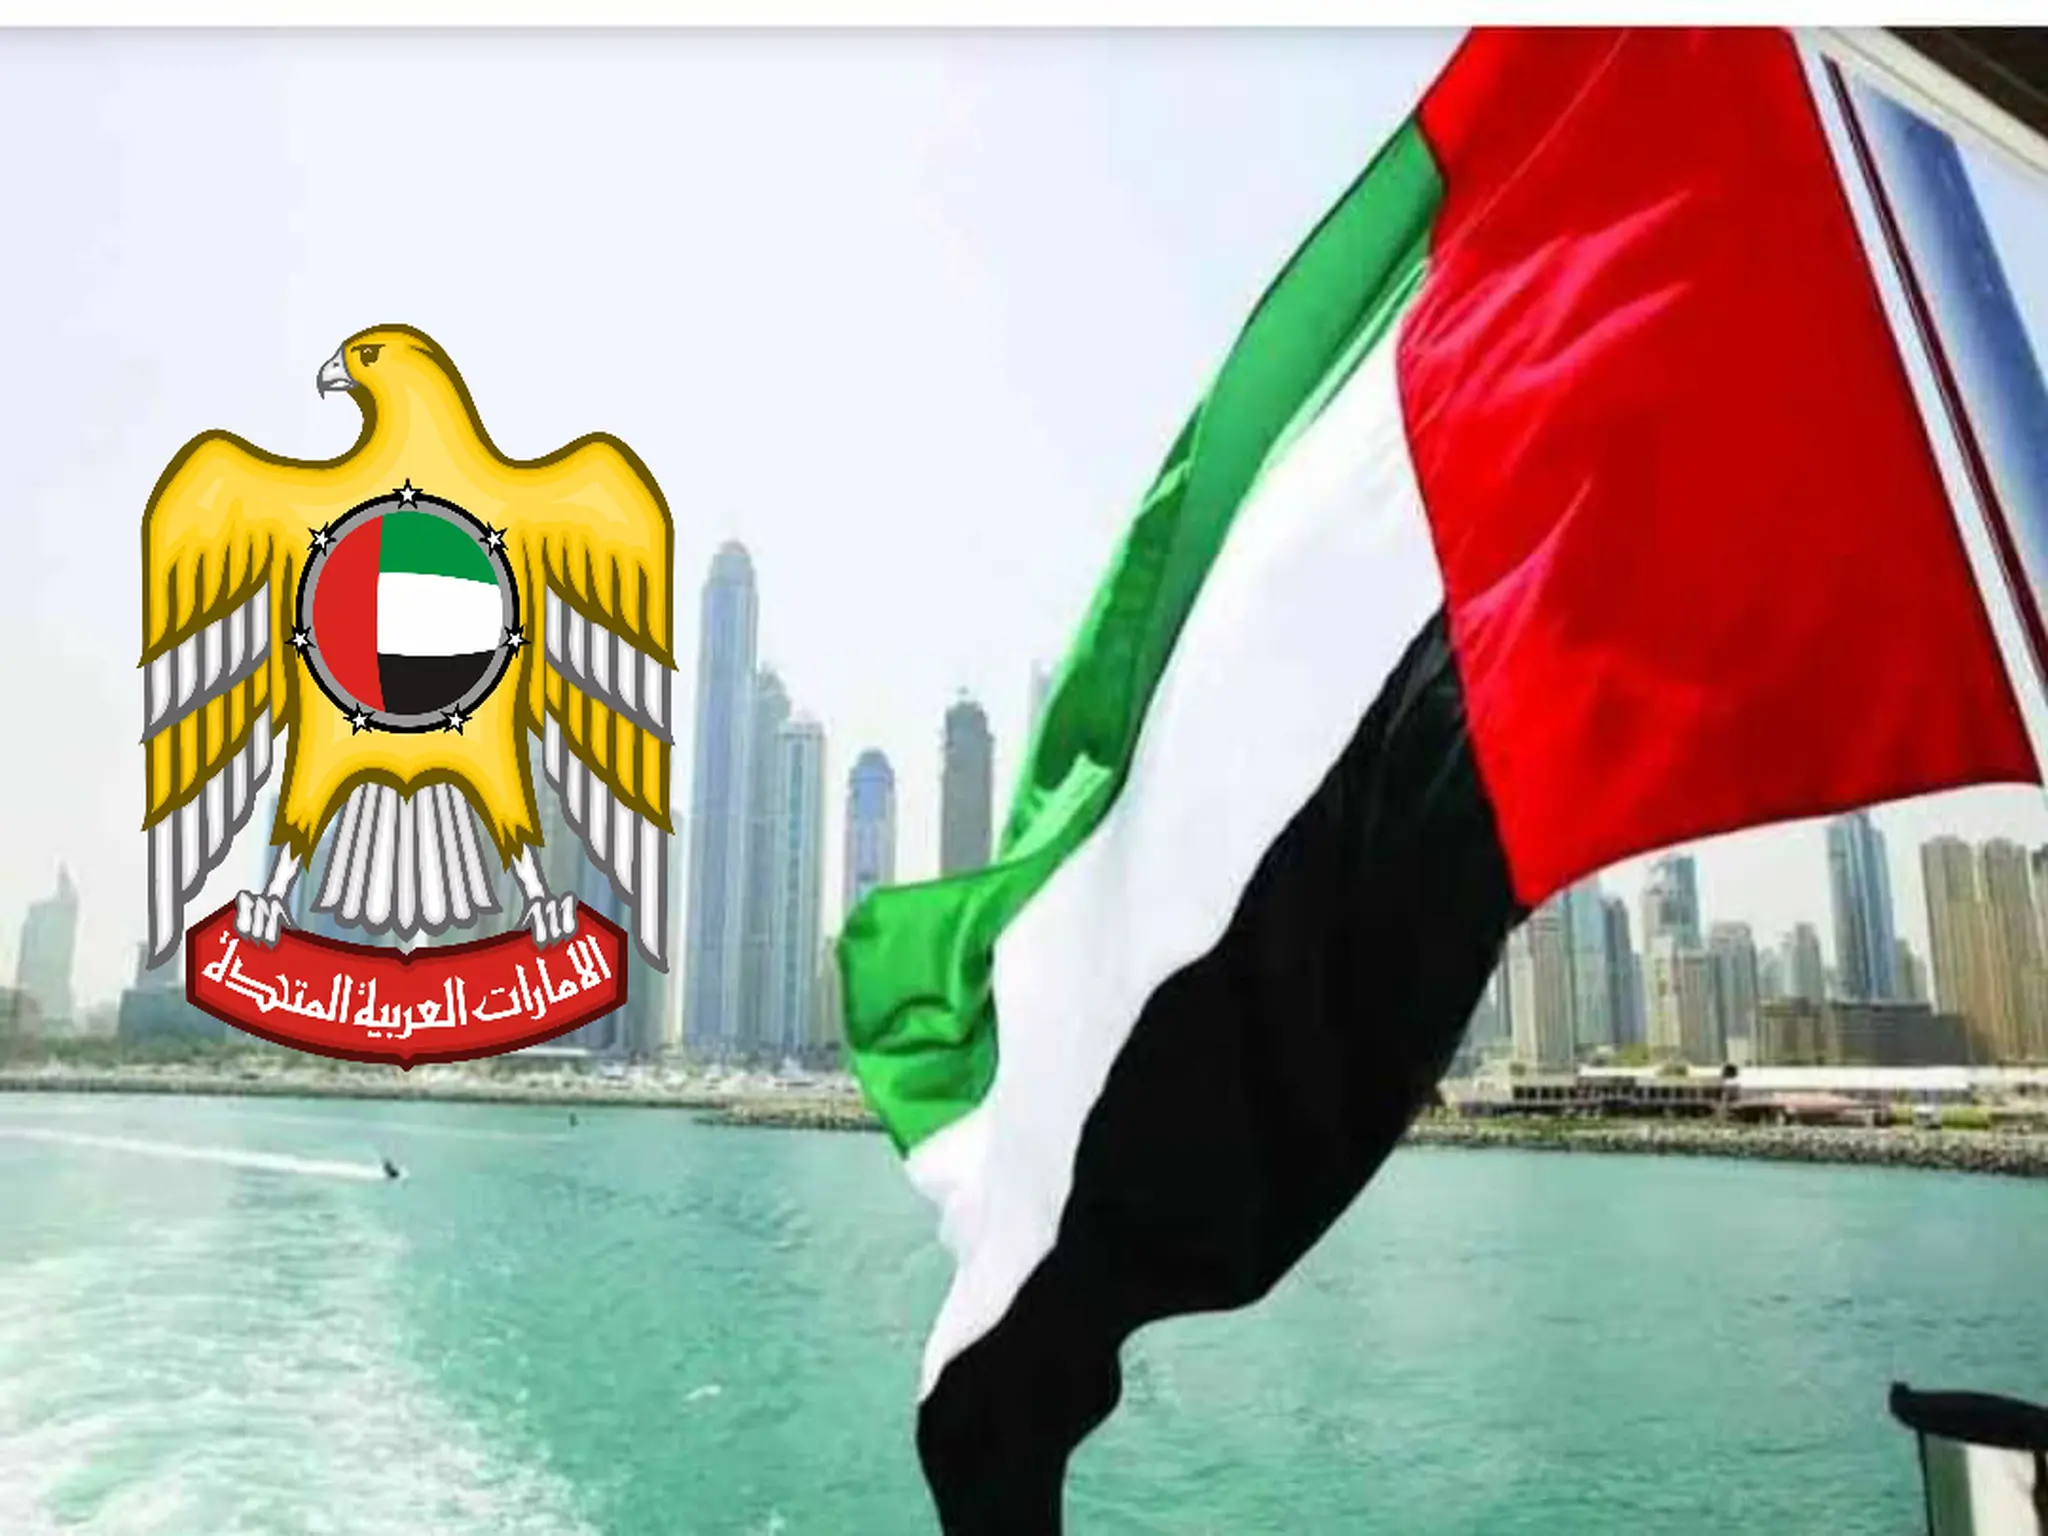 List of publication prohibitions for residents of the Emirates, citizens and expatriates